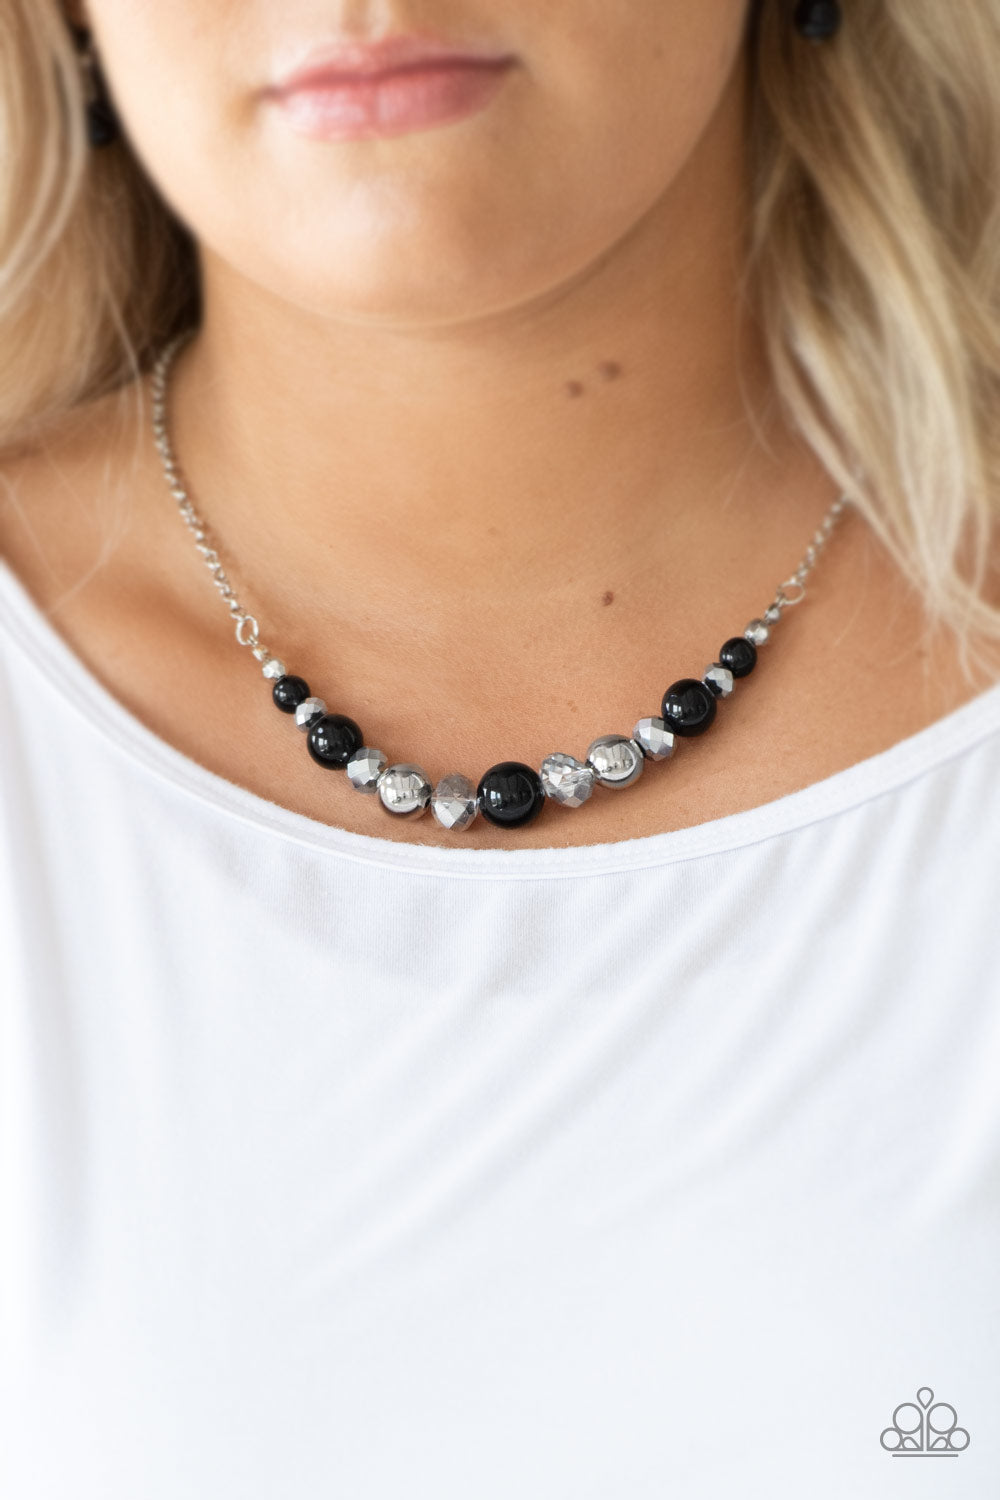 The Big-Leaguer- Black And Silver Necklace And Earrings